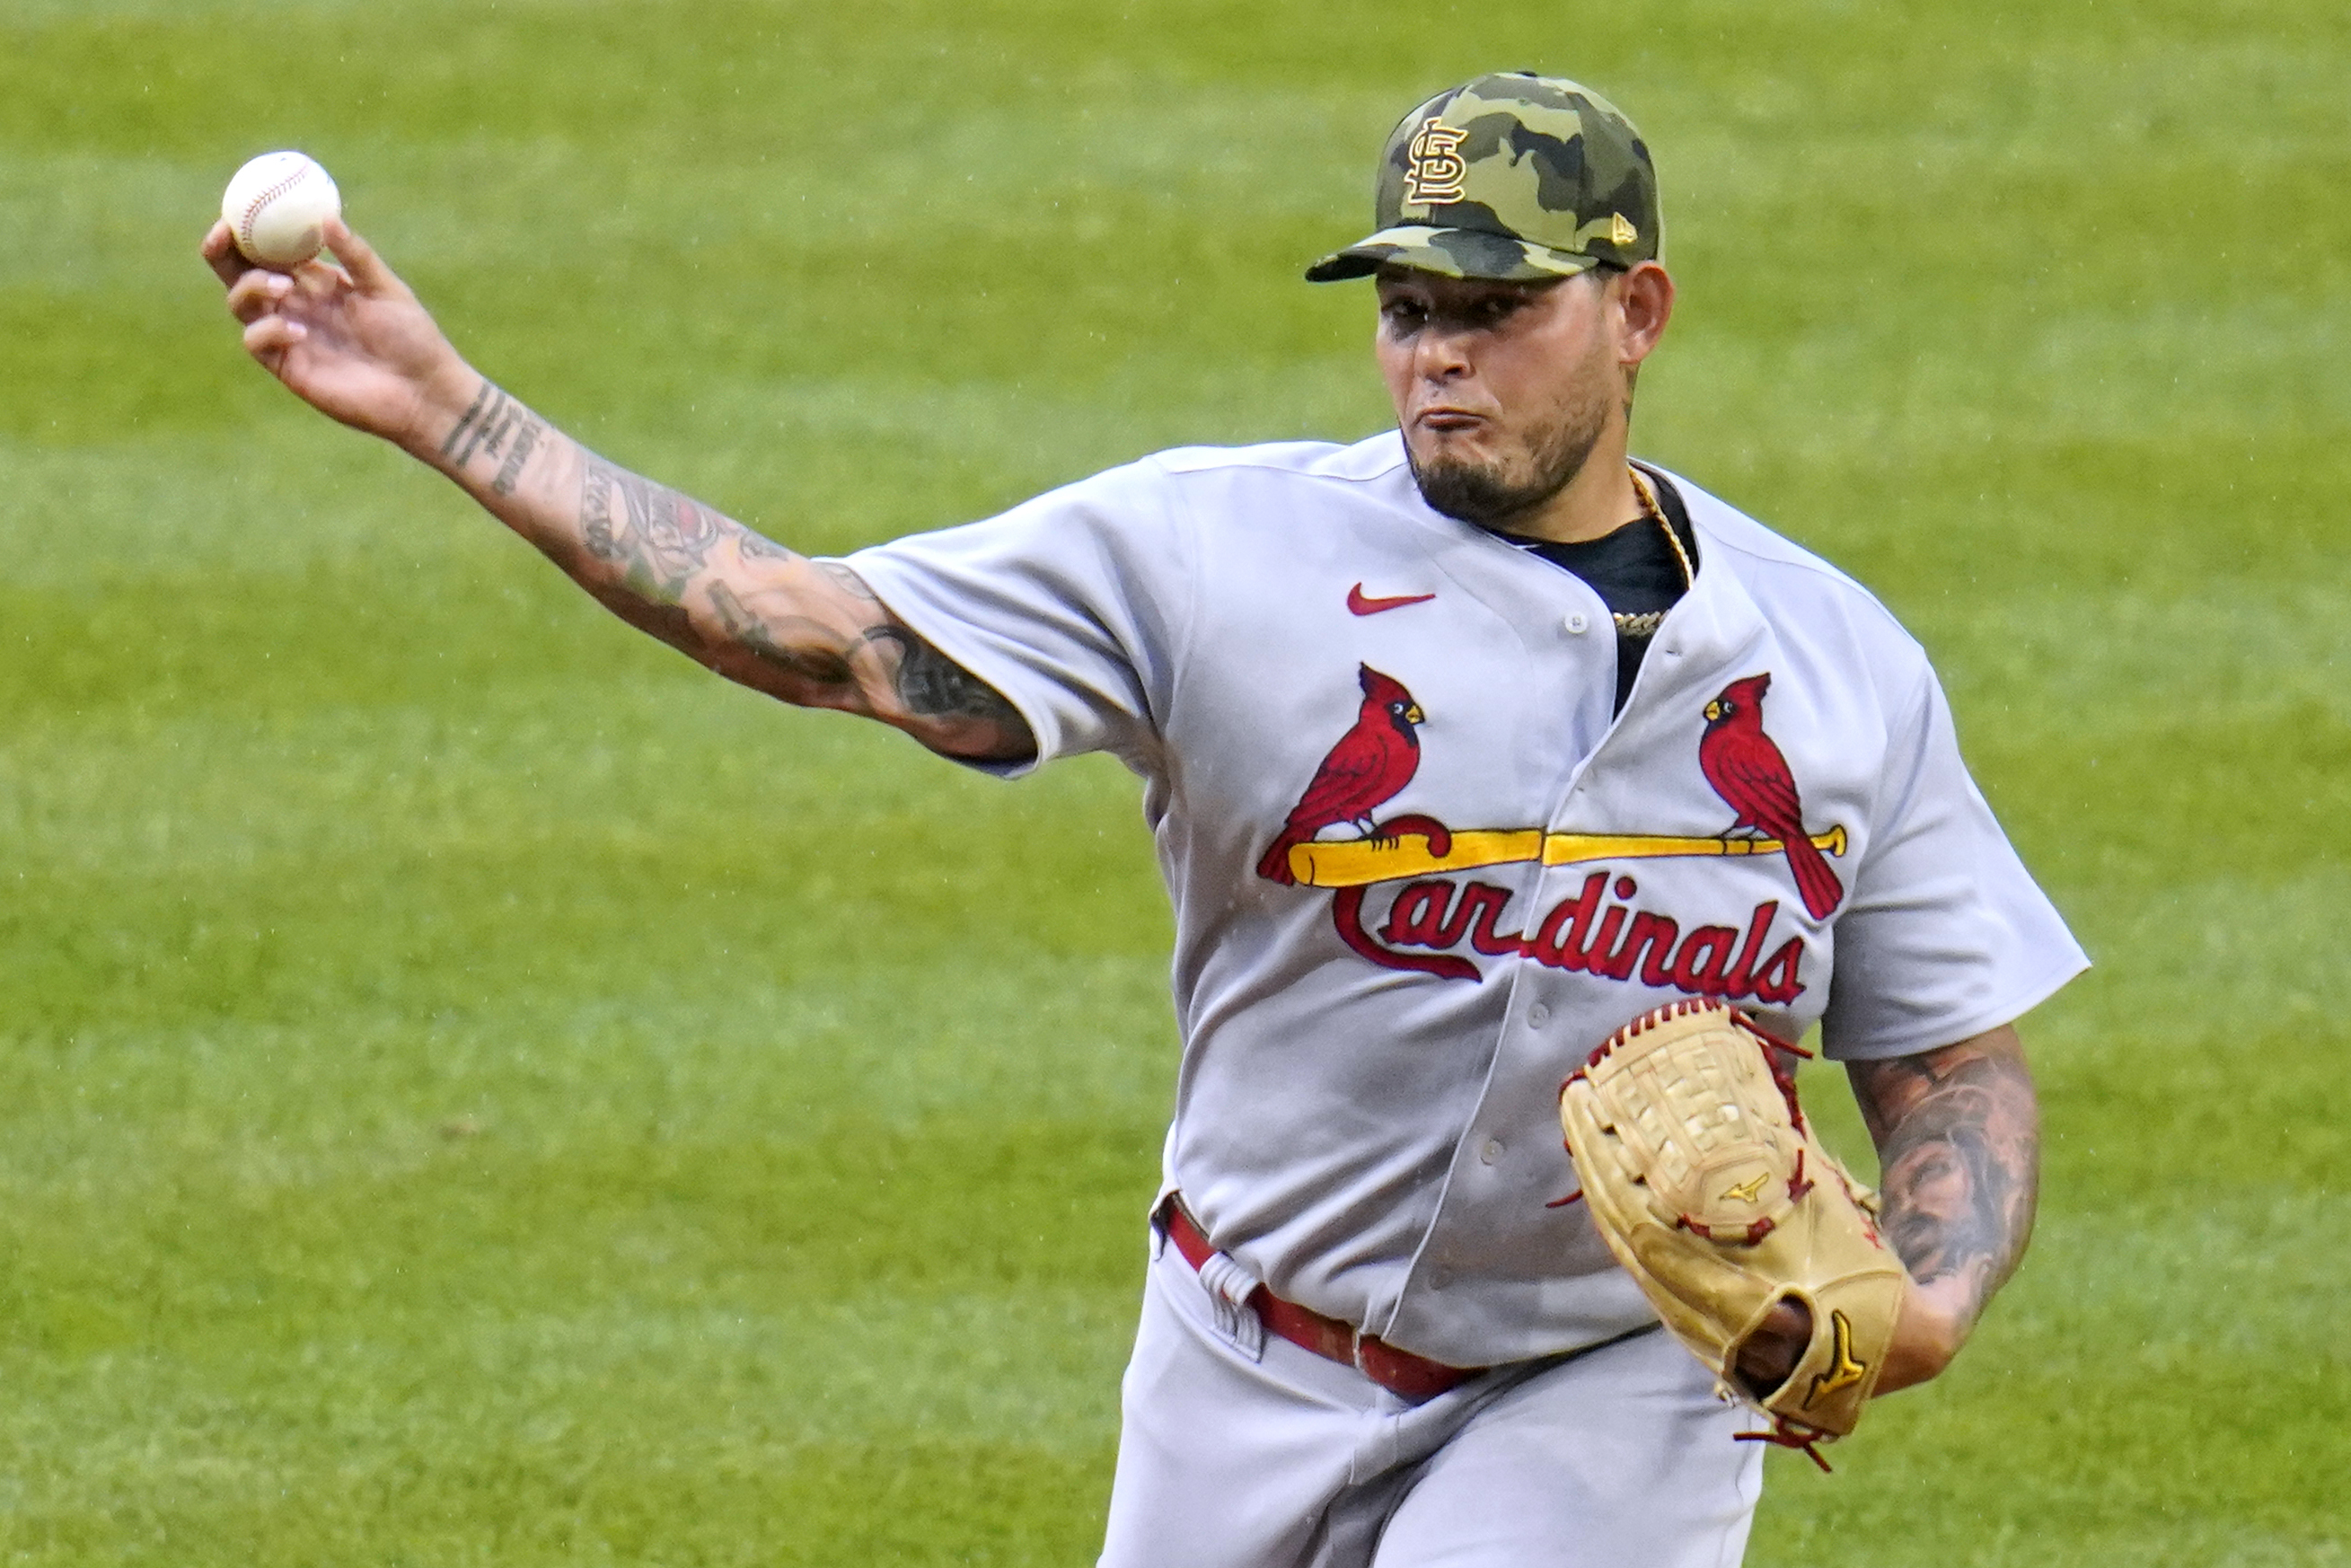 All-star catcher Yadier Molina top St. Louis Cardinals' player saying he  tested positive for coronavirus